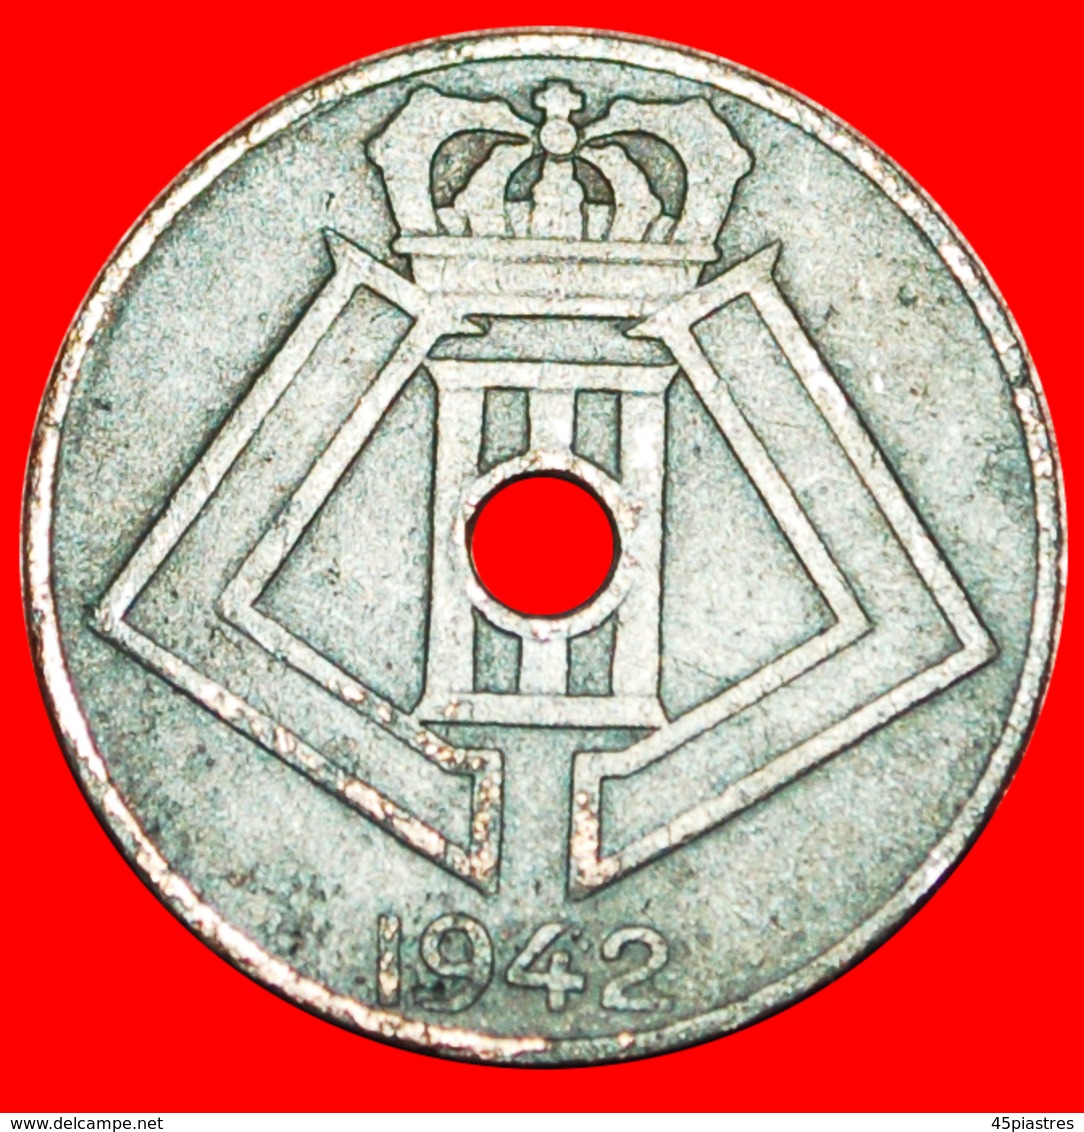 # OCCUPATION BY GERMANY~DUTCH LEGEND: BELGIUM ★ 5 CENTIMES 1942!  LOW START ★ NO RESERVE! Leopold III (1934-1950) - 5 Centimes